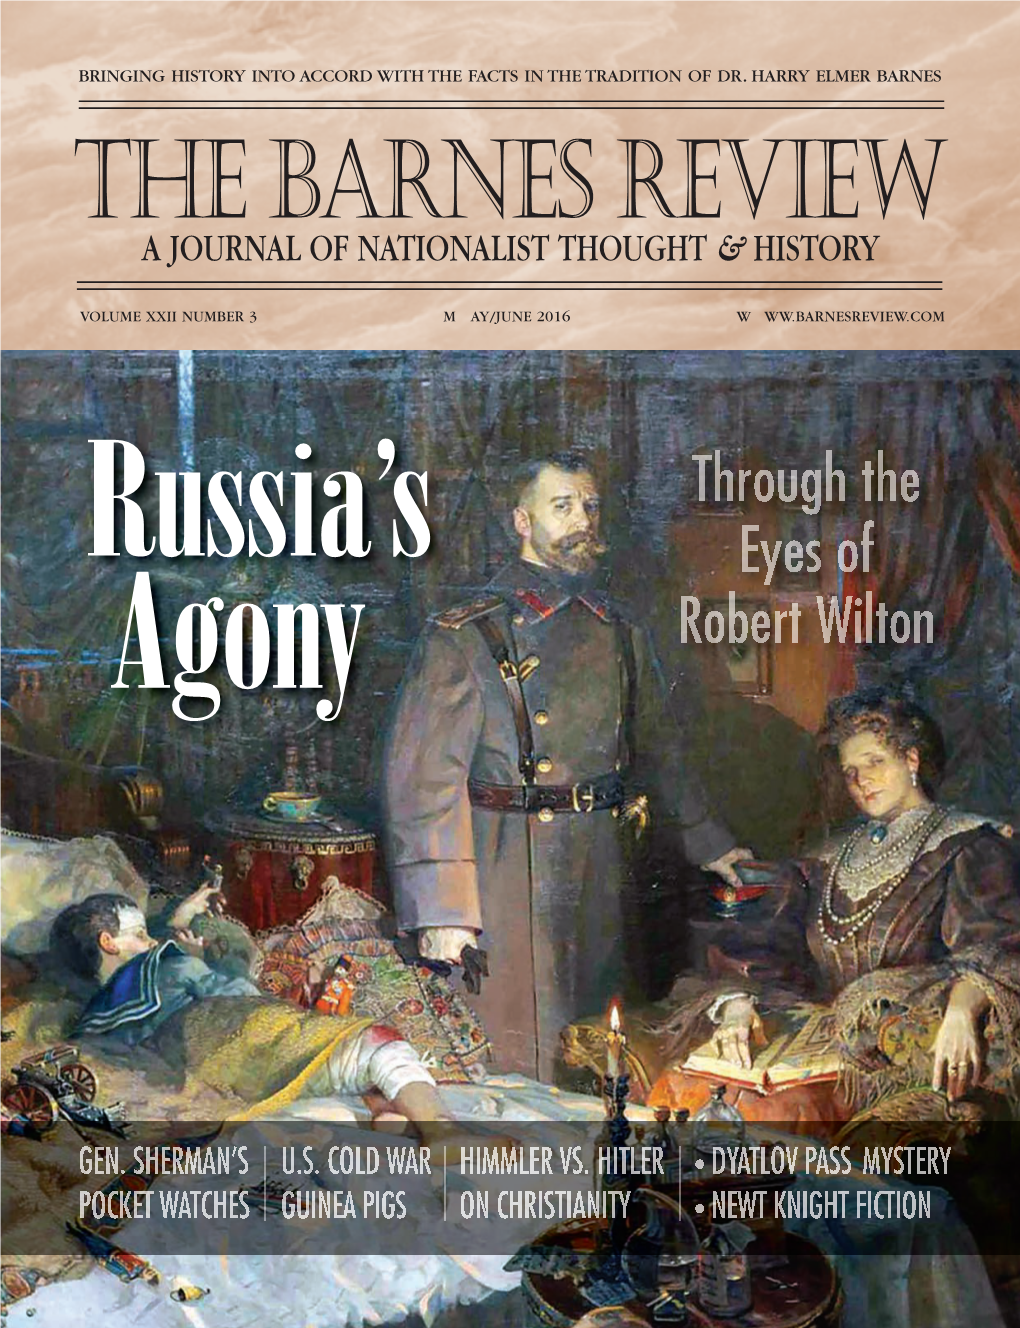 The Barnes Review About the Civil War Is Wrong, a JOURNAL of NATIONALIST THOUGHT & HISTORY Ask a Southerner! VOLUME XXII NUMBER 3 M AY/JUNE 2016 W WW.BARNESREVIEW.COM